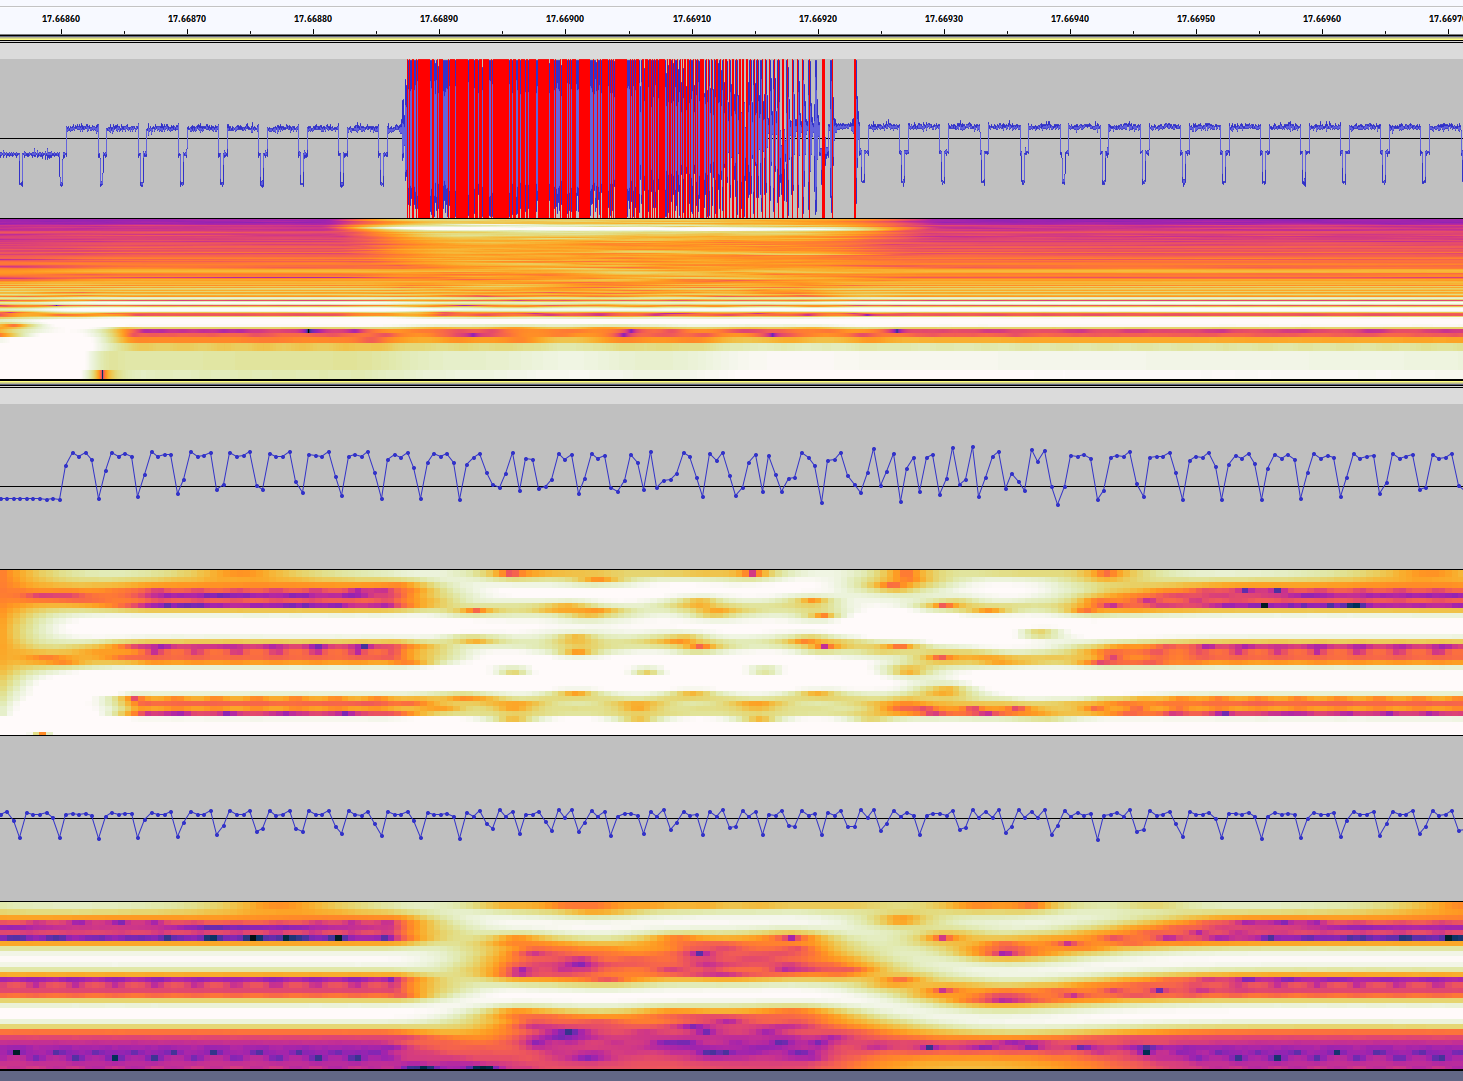 Screenshot of Wii's luma signal and GBS-C's VGA blue and hsync lines, with a spectrogram showing high-frequency luma noise shortly before output hsync frequency increases.